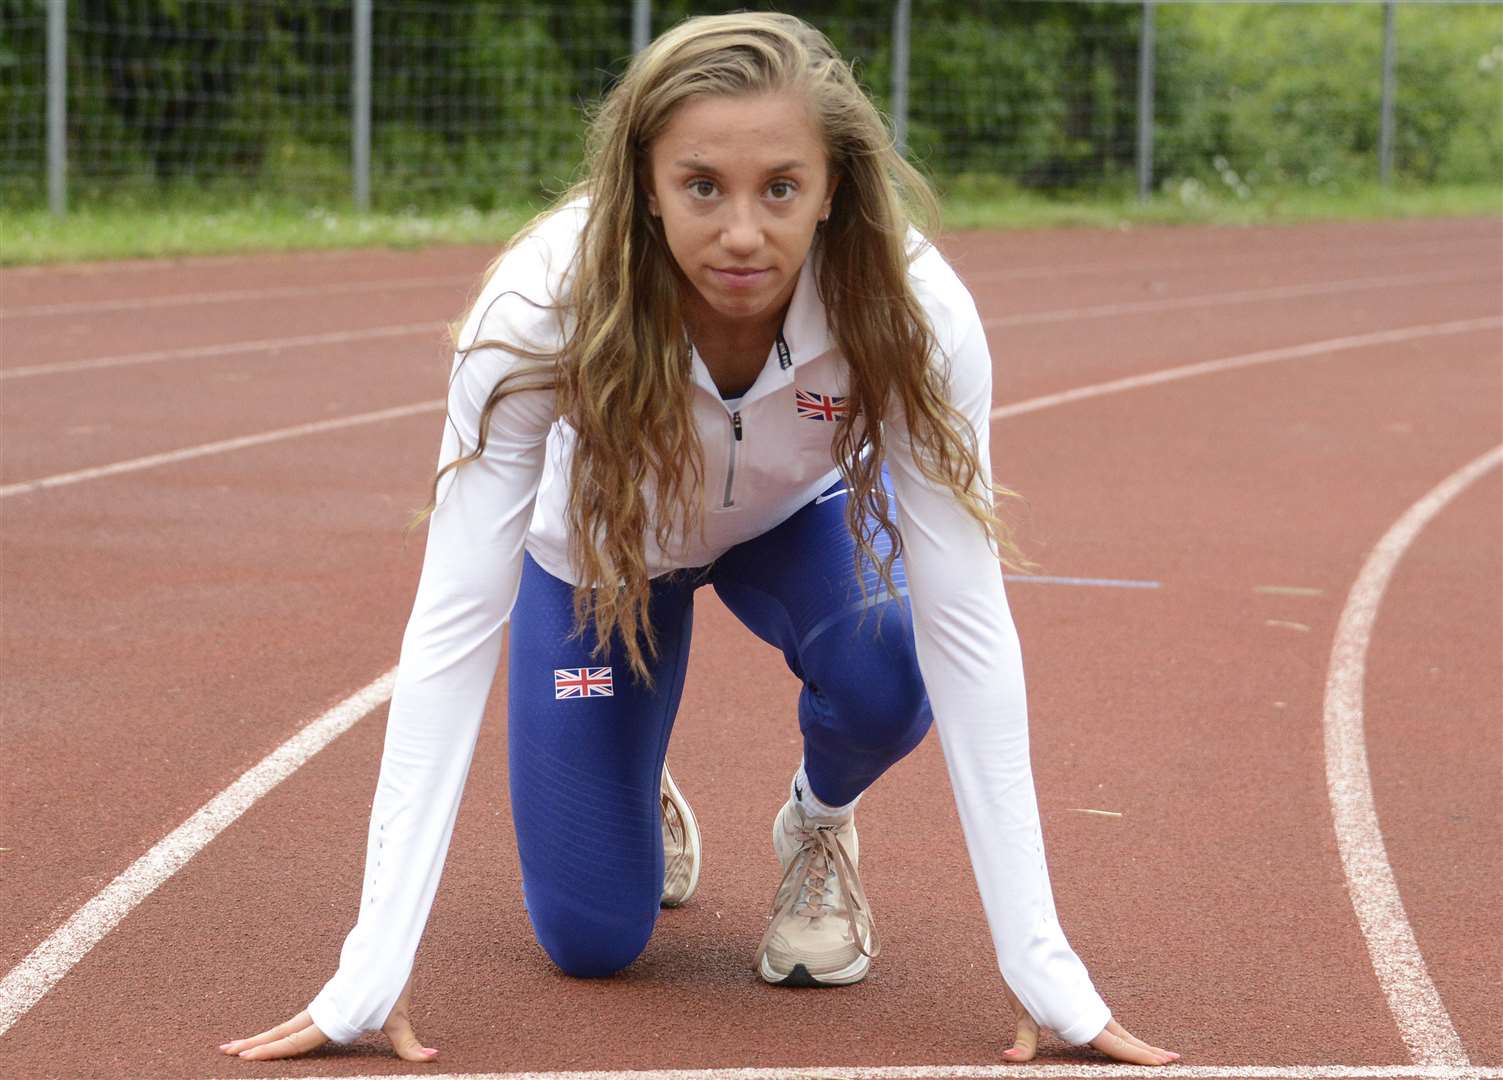 Louise Evans was recently selected to represent Great Britain in the 4x400m relay